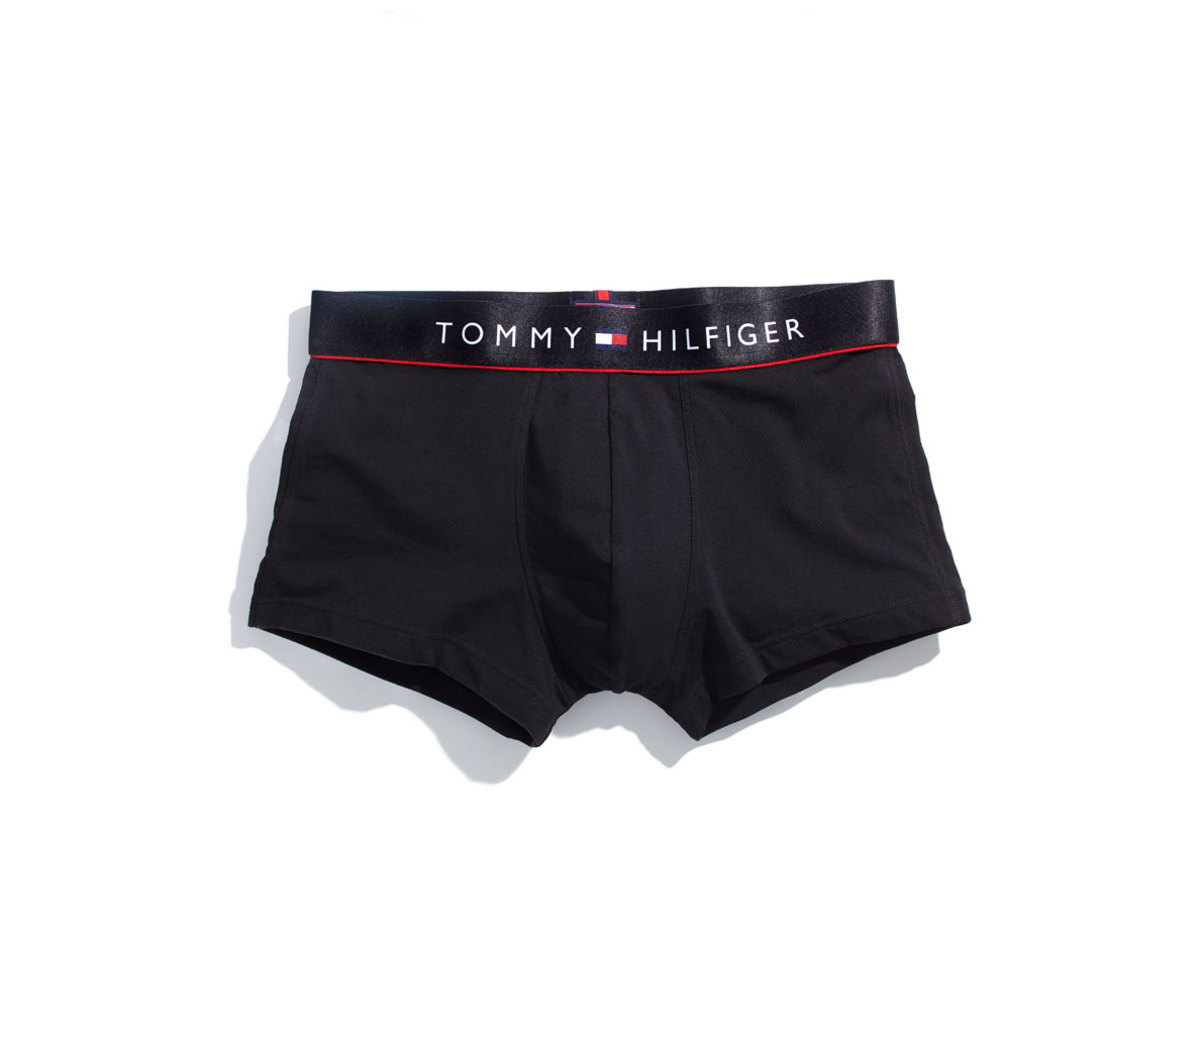 The Underwear That'll Show Off Your Style (and Everything Else